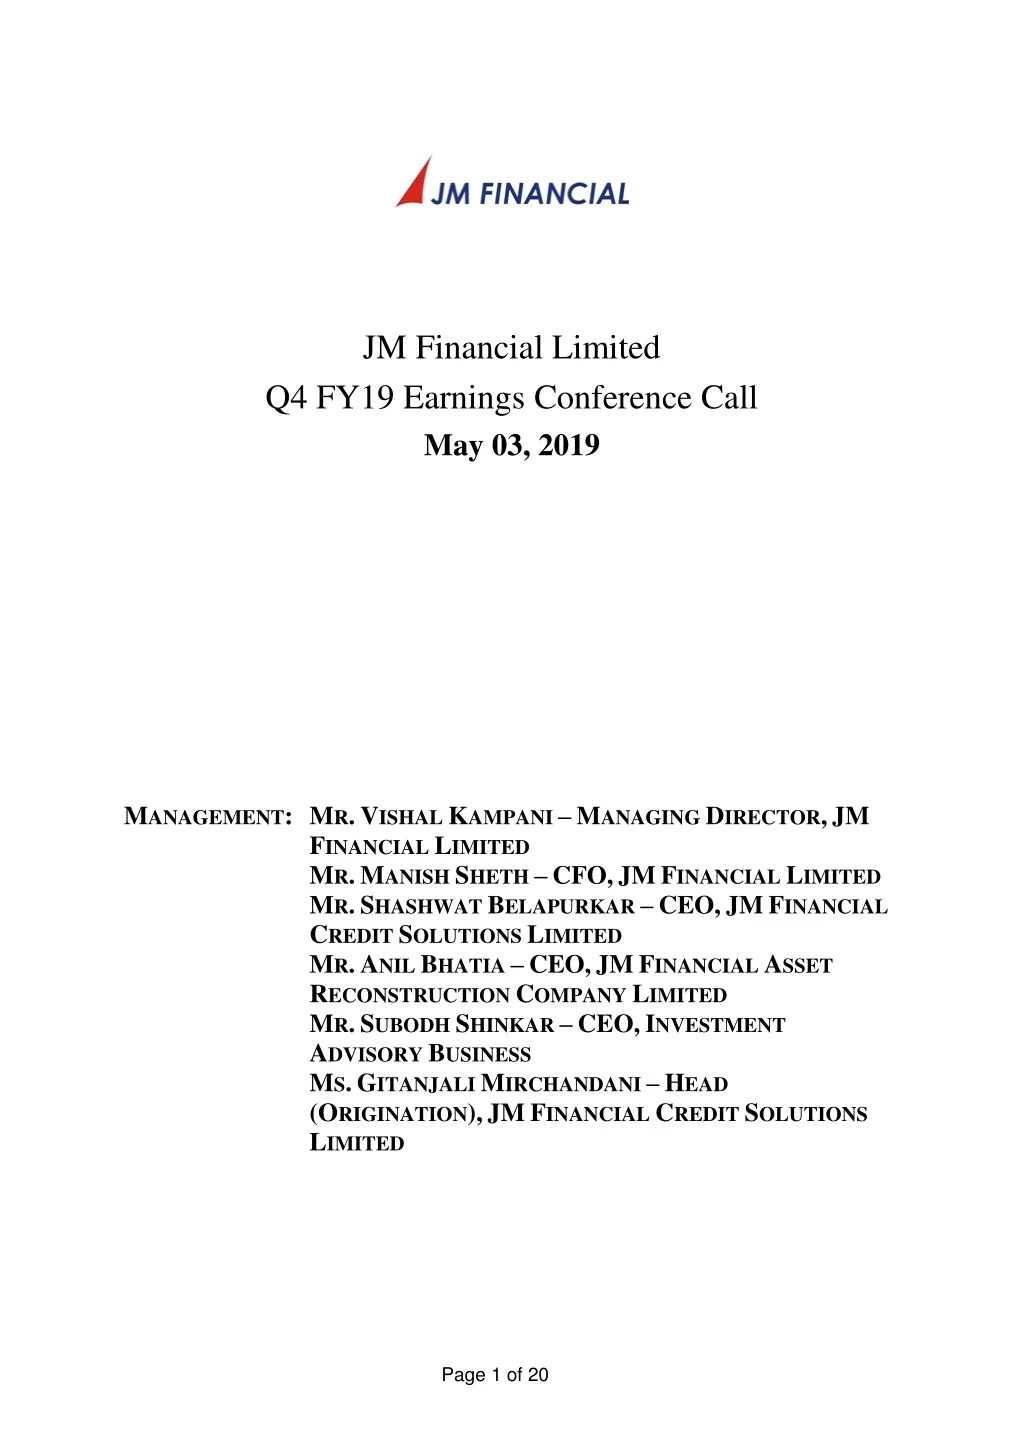 jm financial limited q4 fy19 earnings conference